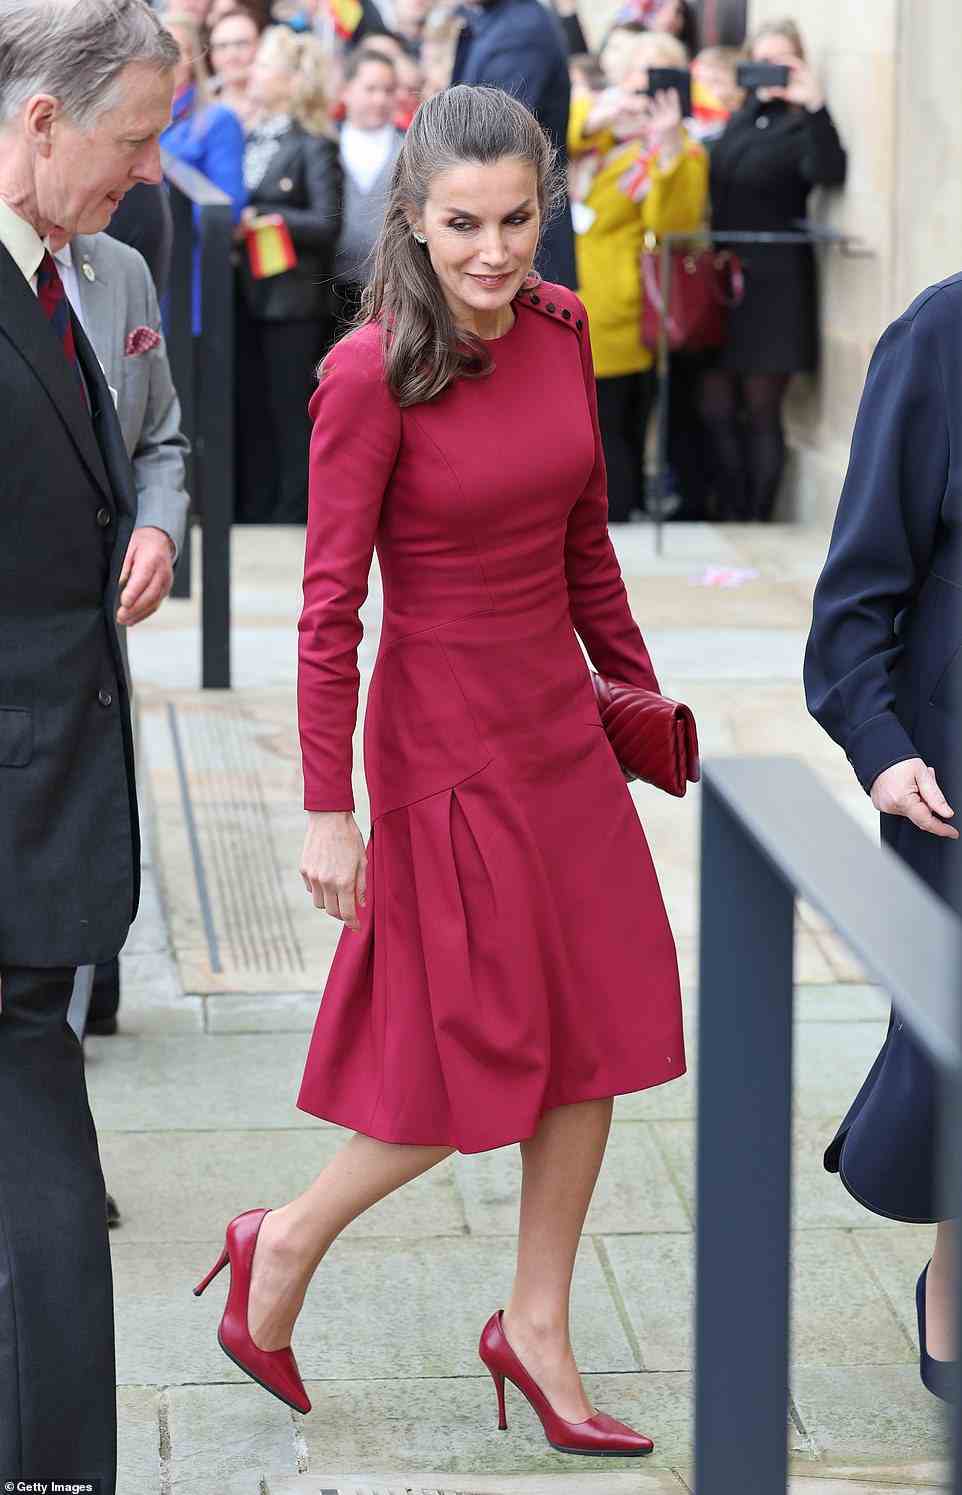 The mother-of-two cut an elegant figure in a raspberry red dress for the outing, which she paired with matching accessories (pictured)